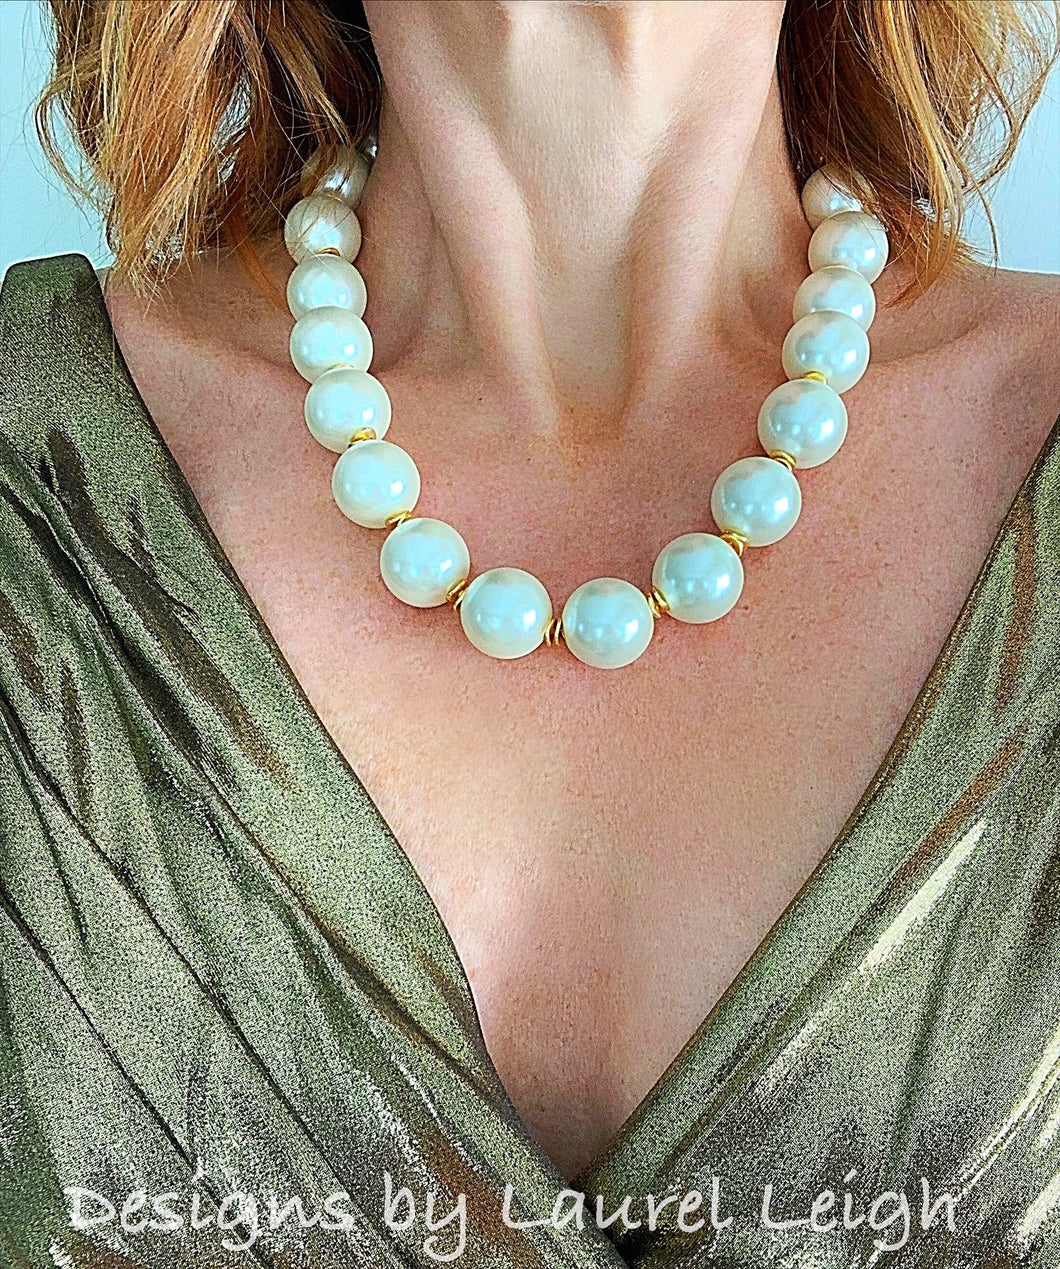 Chunky Faux Pearl & Gold Accent Necklace - Ginger jar